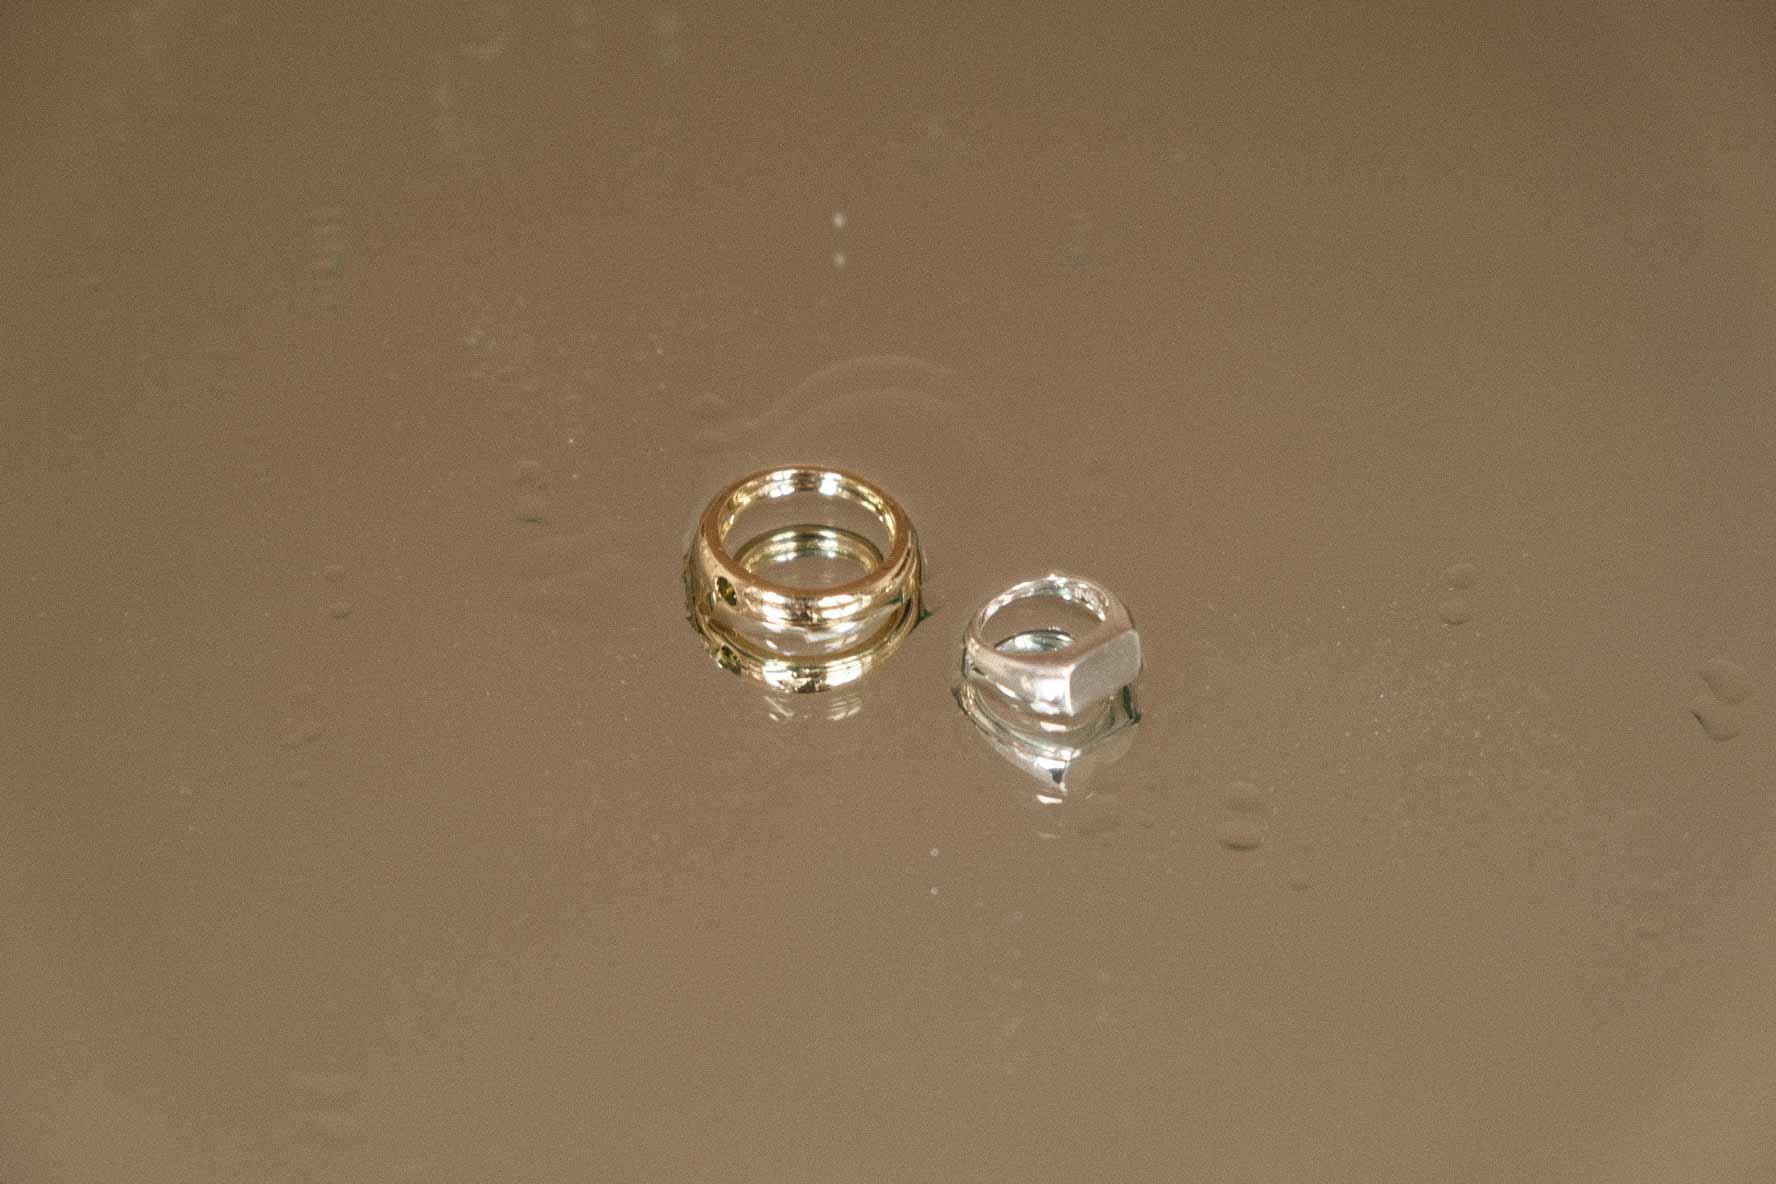 Image of a 14k gold ring and sterling silver ring sprinkled with water droplets